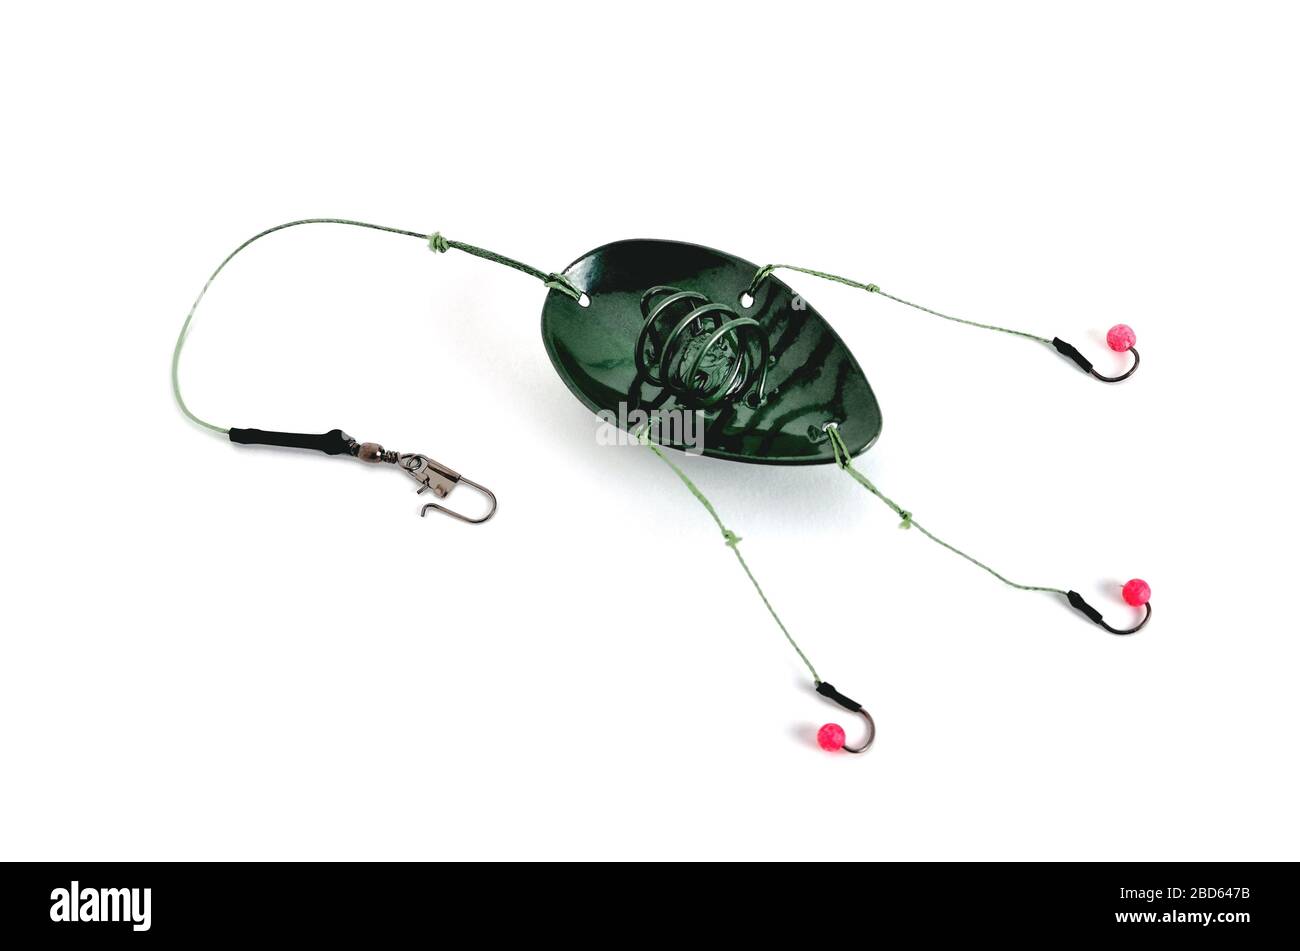 fishing trough spoon, fishing hooks and fishing line, accessories